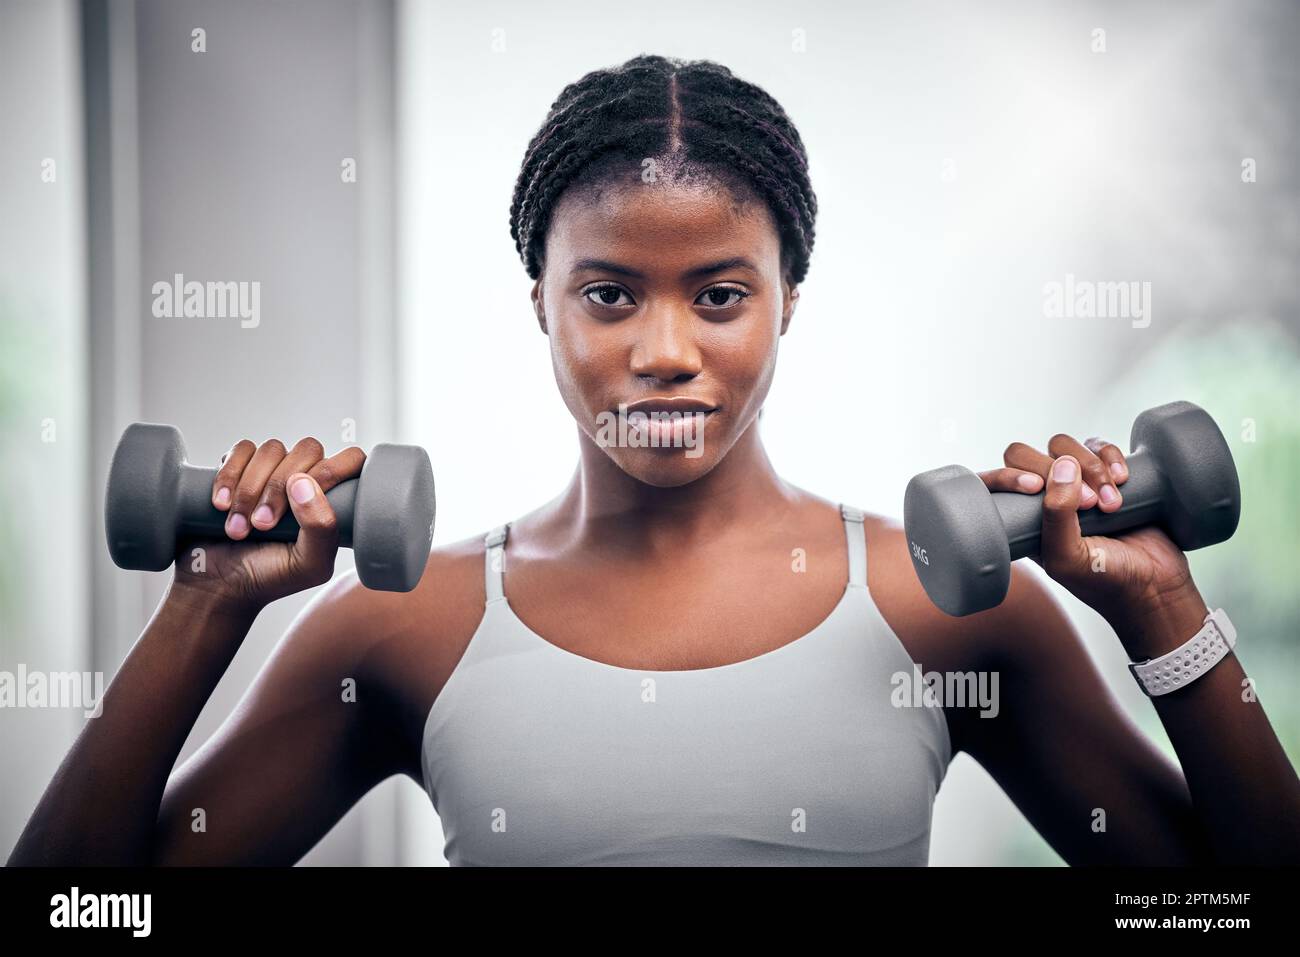 Face portrait, dumbbells and black woman training in gym for